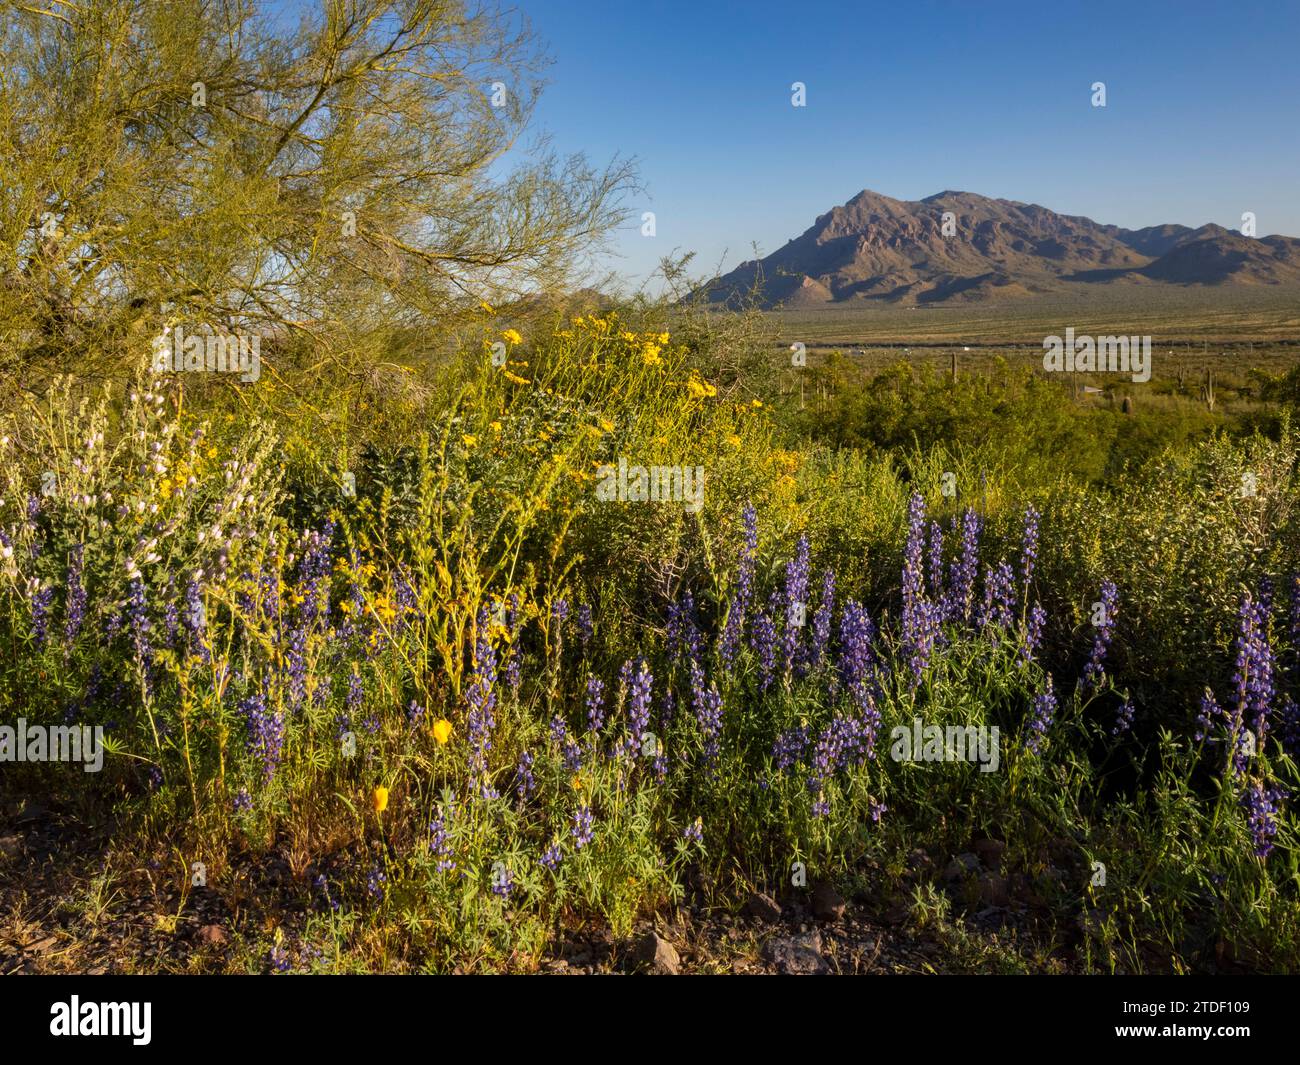 Wild flowers in bloom after a particularly good rainy season at Picacho Peak State Park, Arizona, United States of America, North America Stock Photo